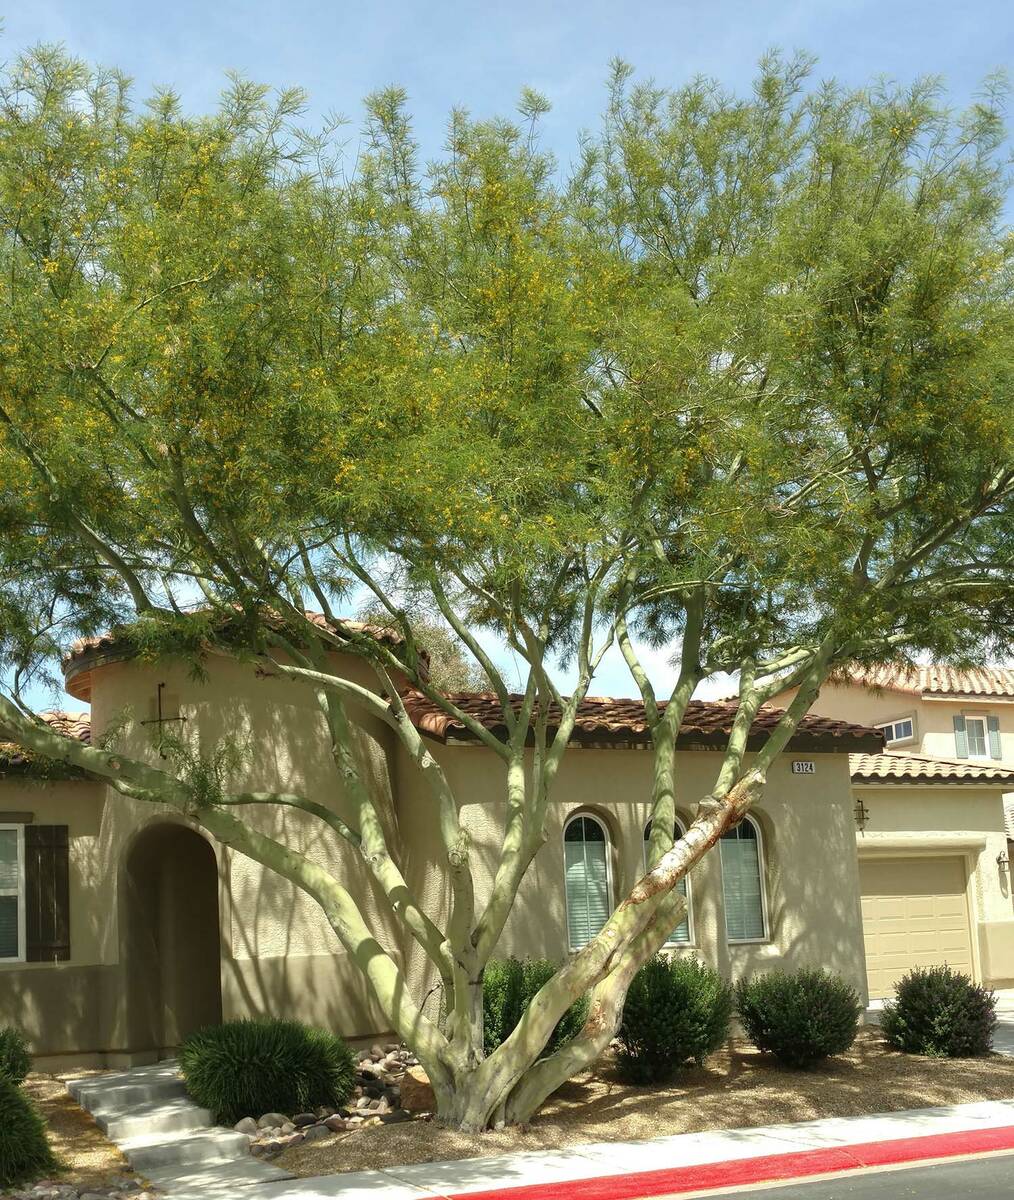 (Photo courtesy Bob Morris) Palo verde trees are xeric, or low in water use, and can provide shade.